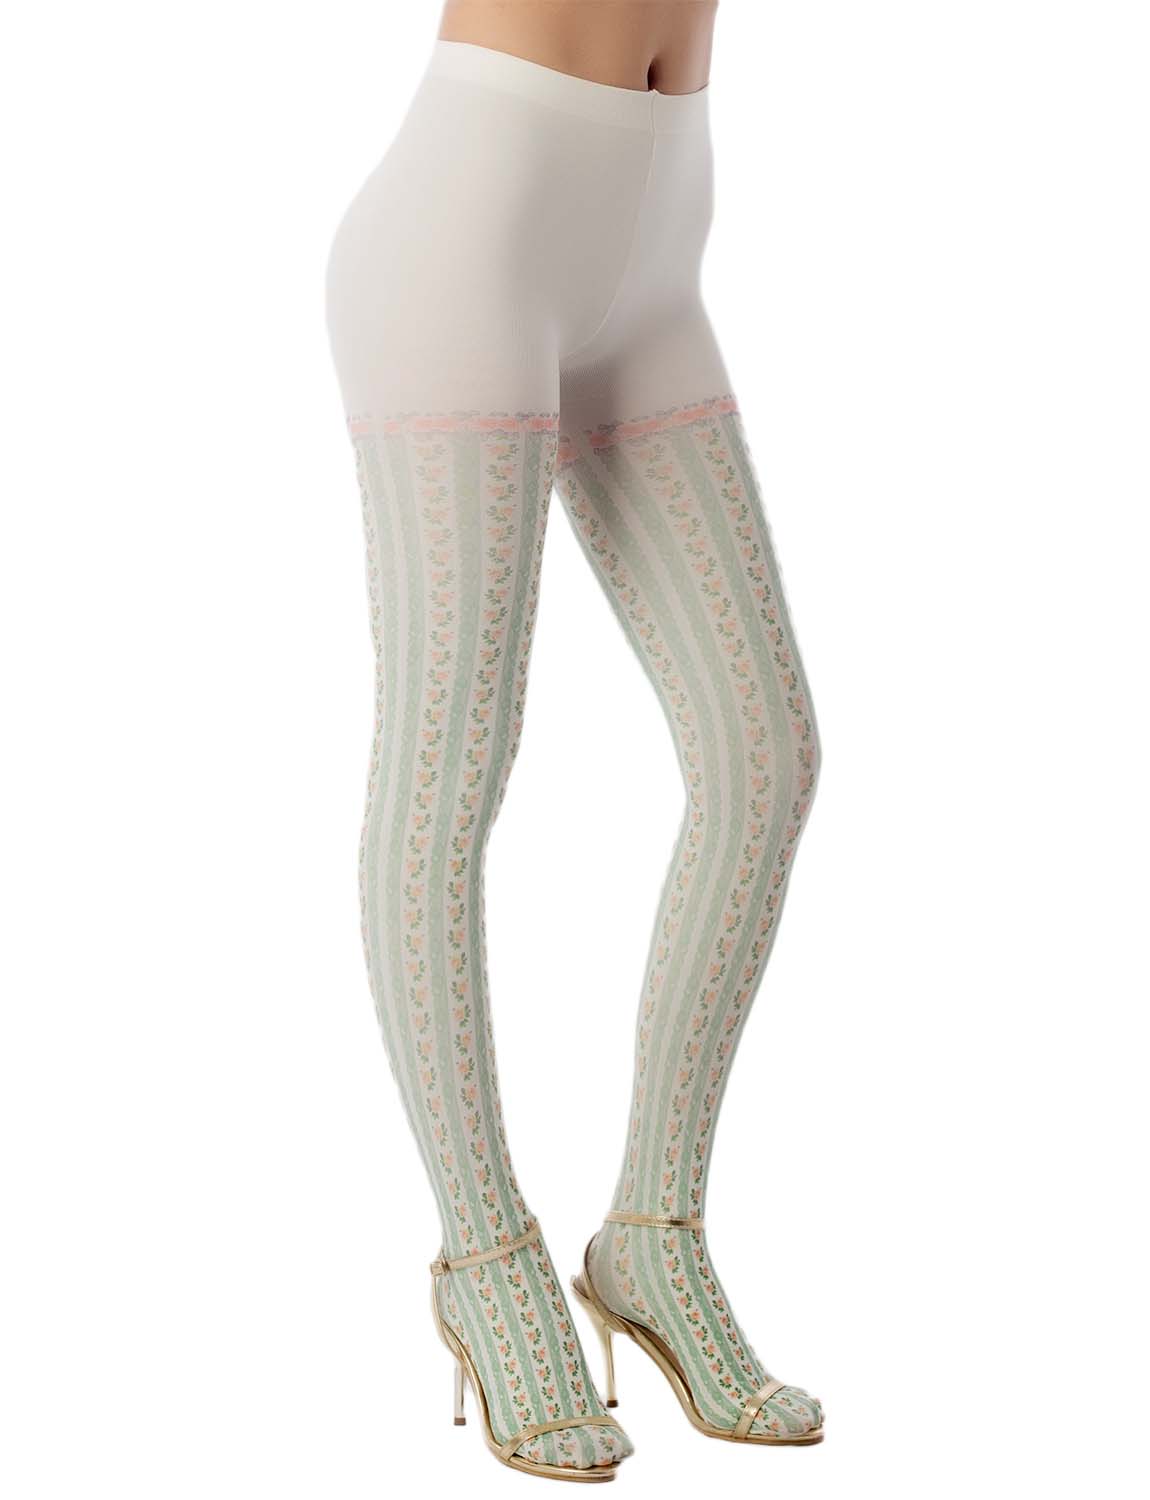 Women's Retro Green Floral Sheer Stretchy Stocking Opaque Pantyhose Tights